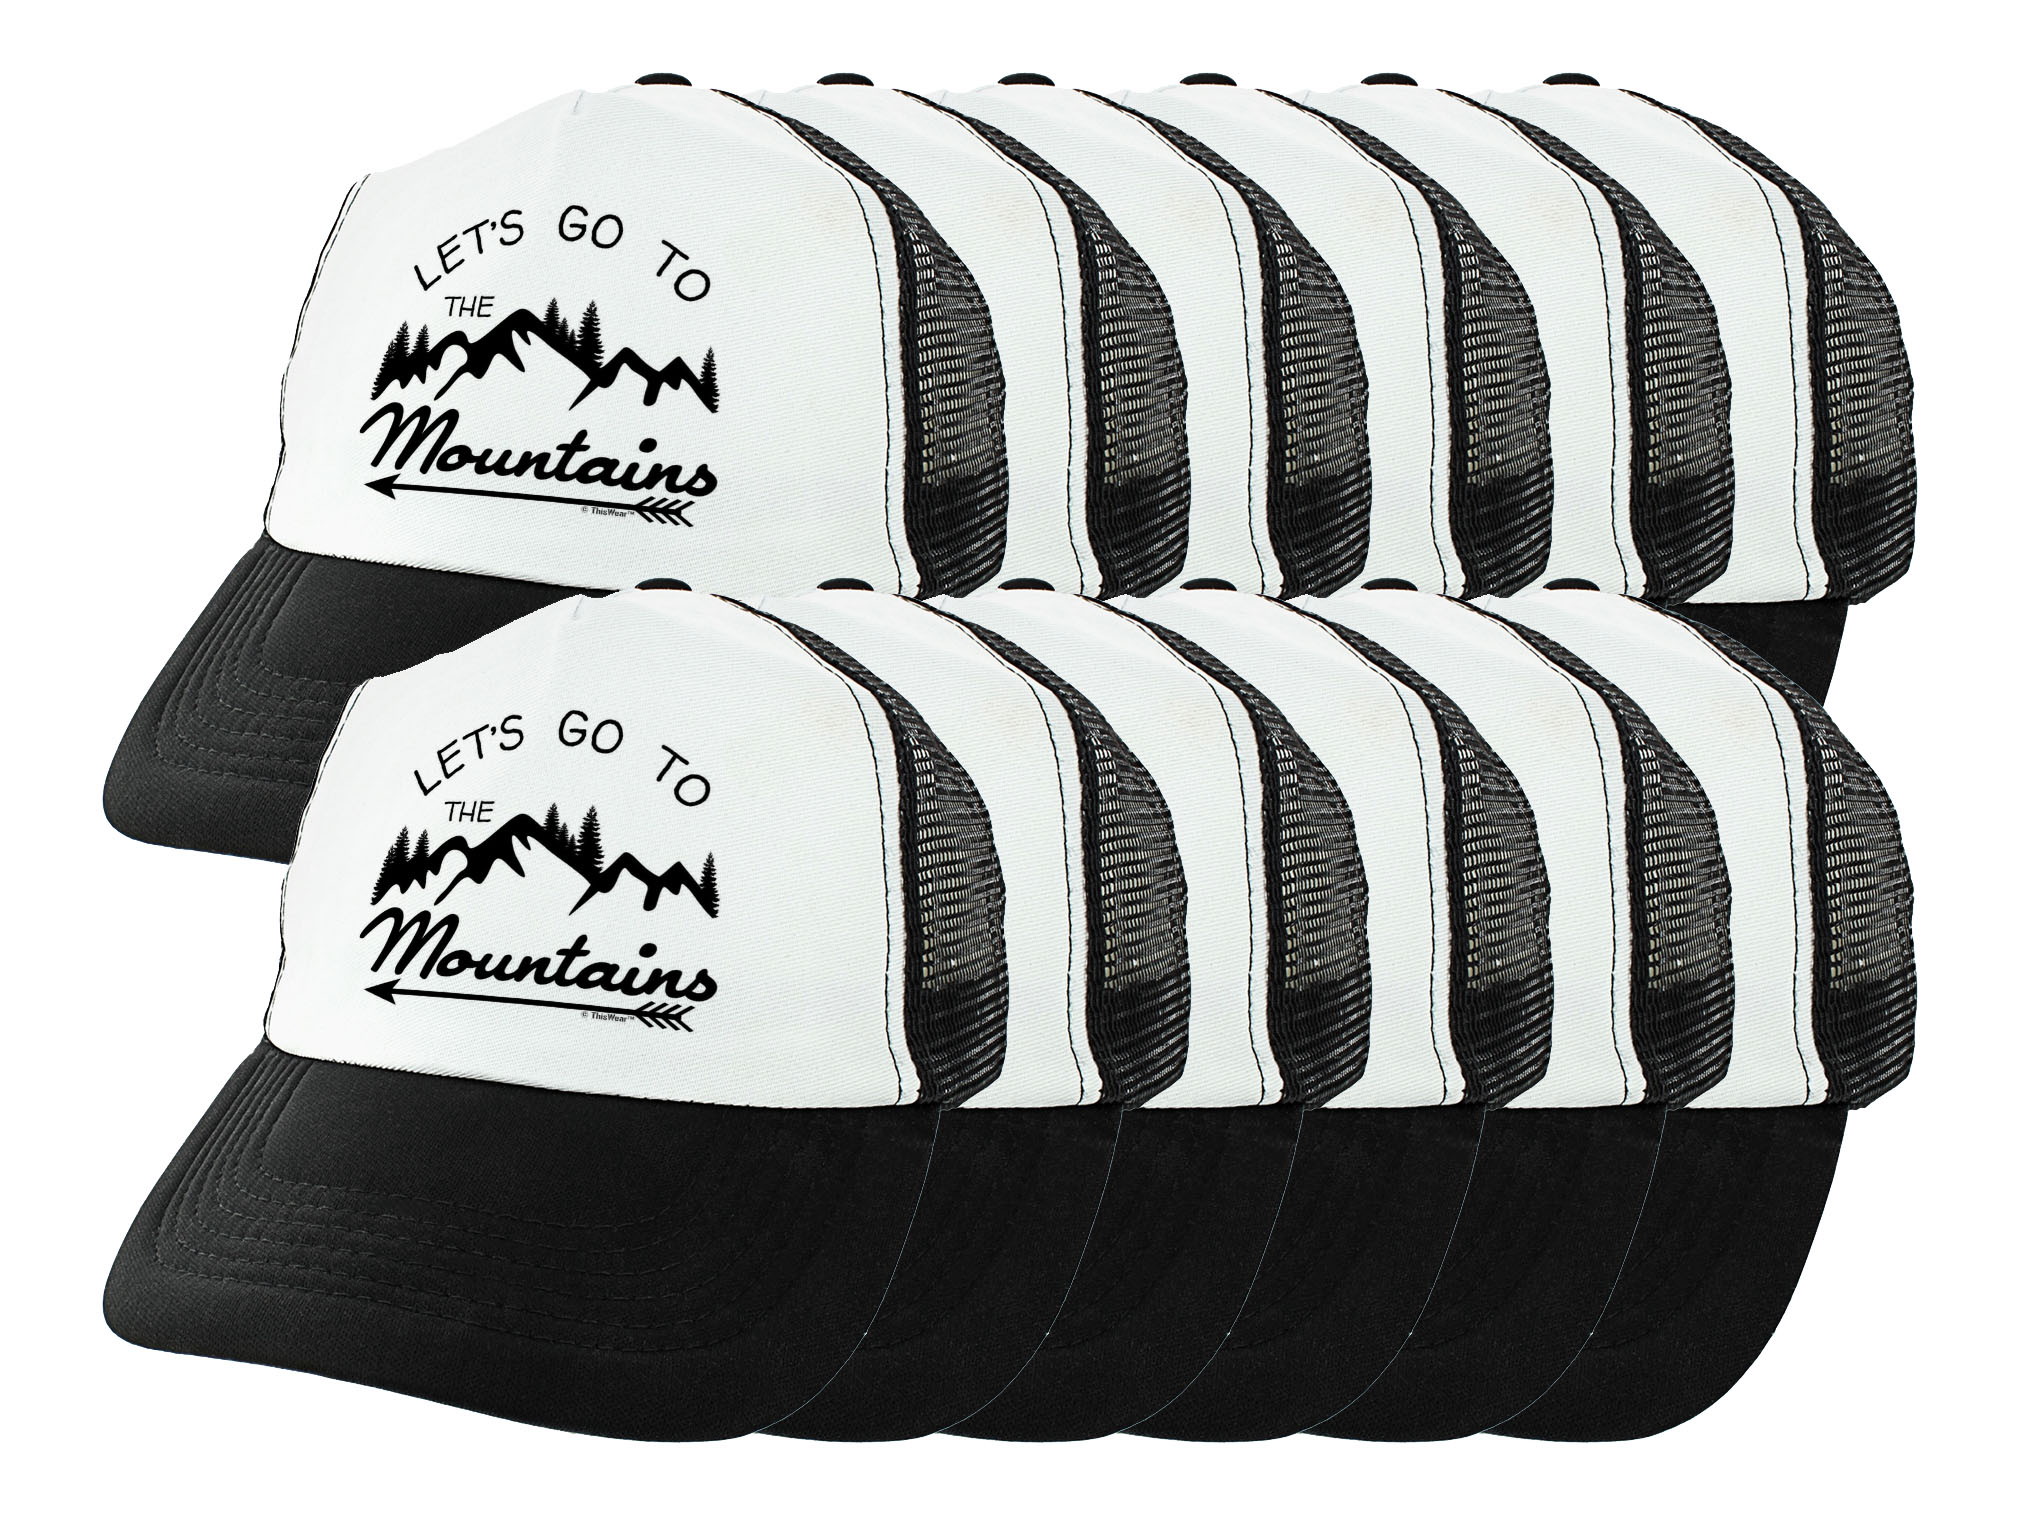 ThisWear Hike Hats Let's Go to the Mountains Mountaineer Hat Hiking Apparel Ski Hats 12-Pack Trucker Hats - image 1 of 1